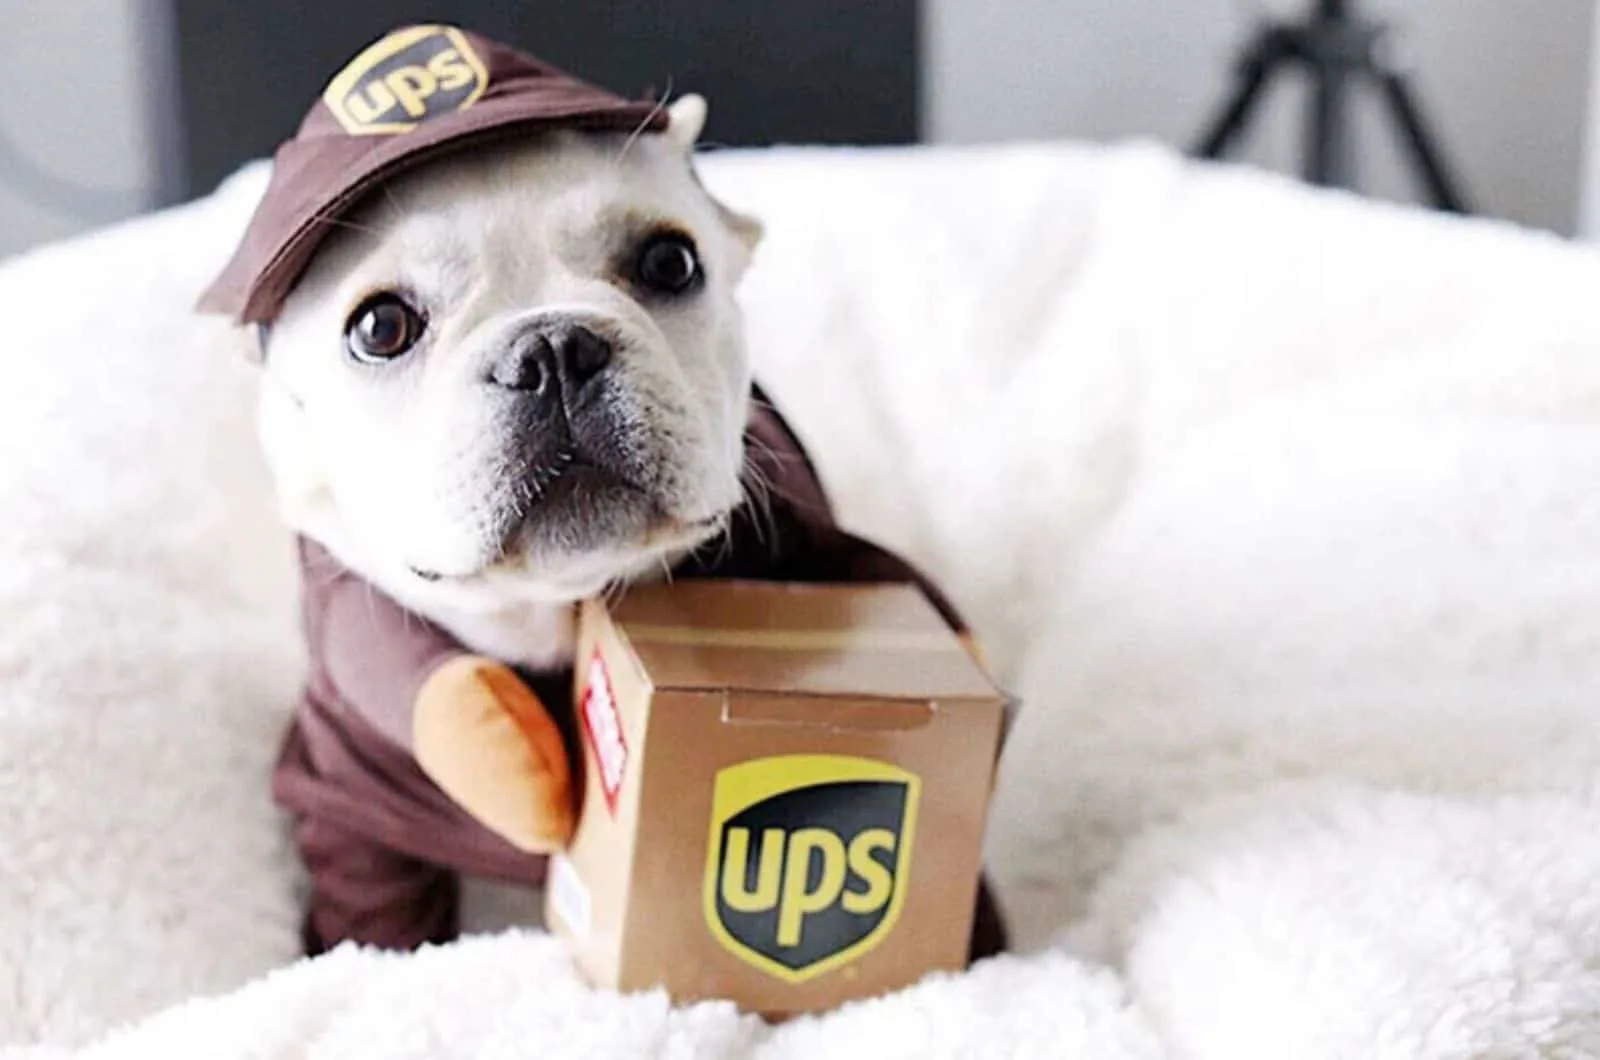 dog wearing ups costume and holding a package